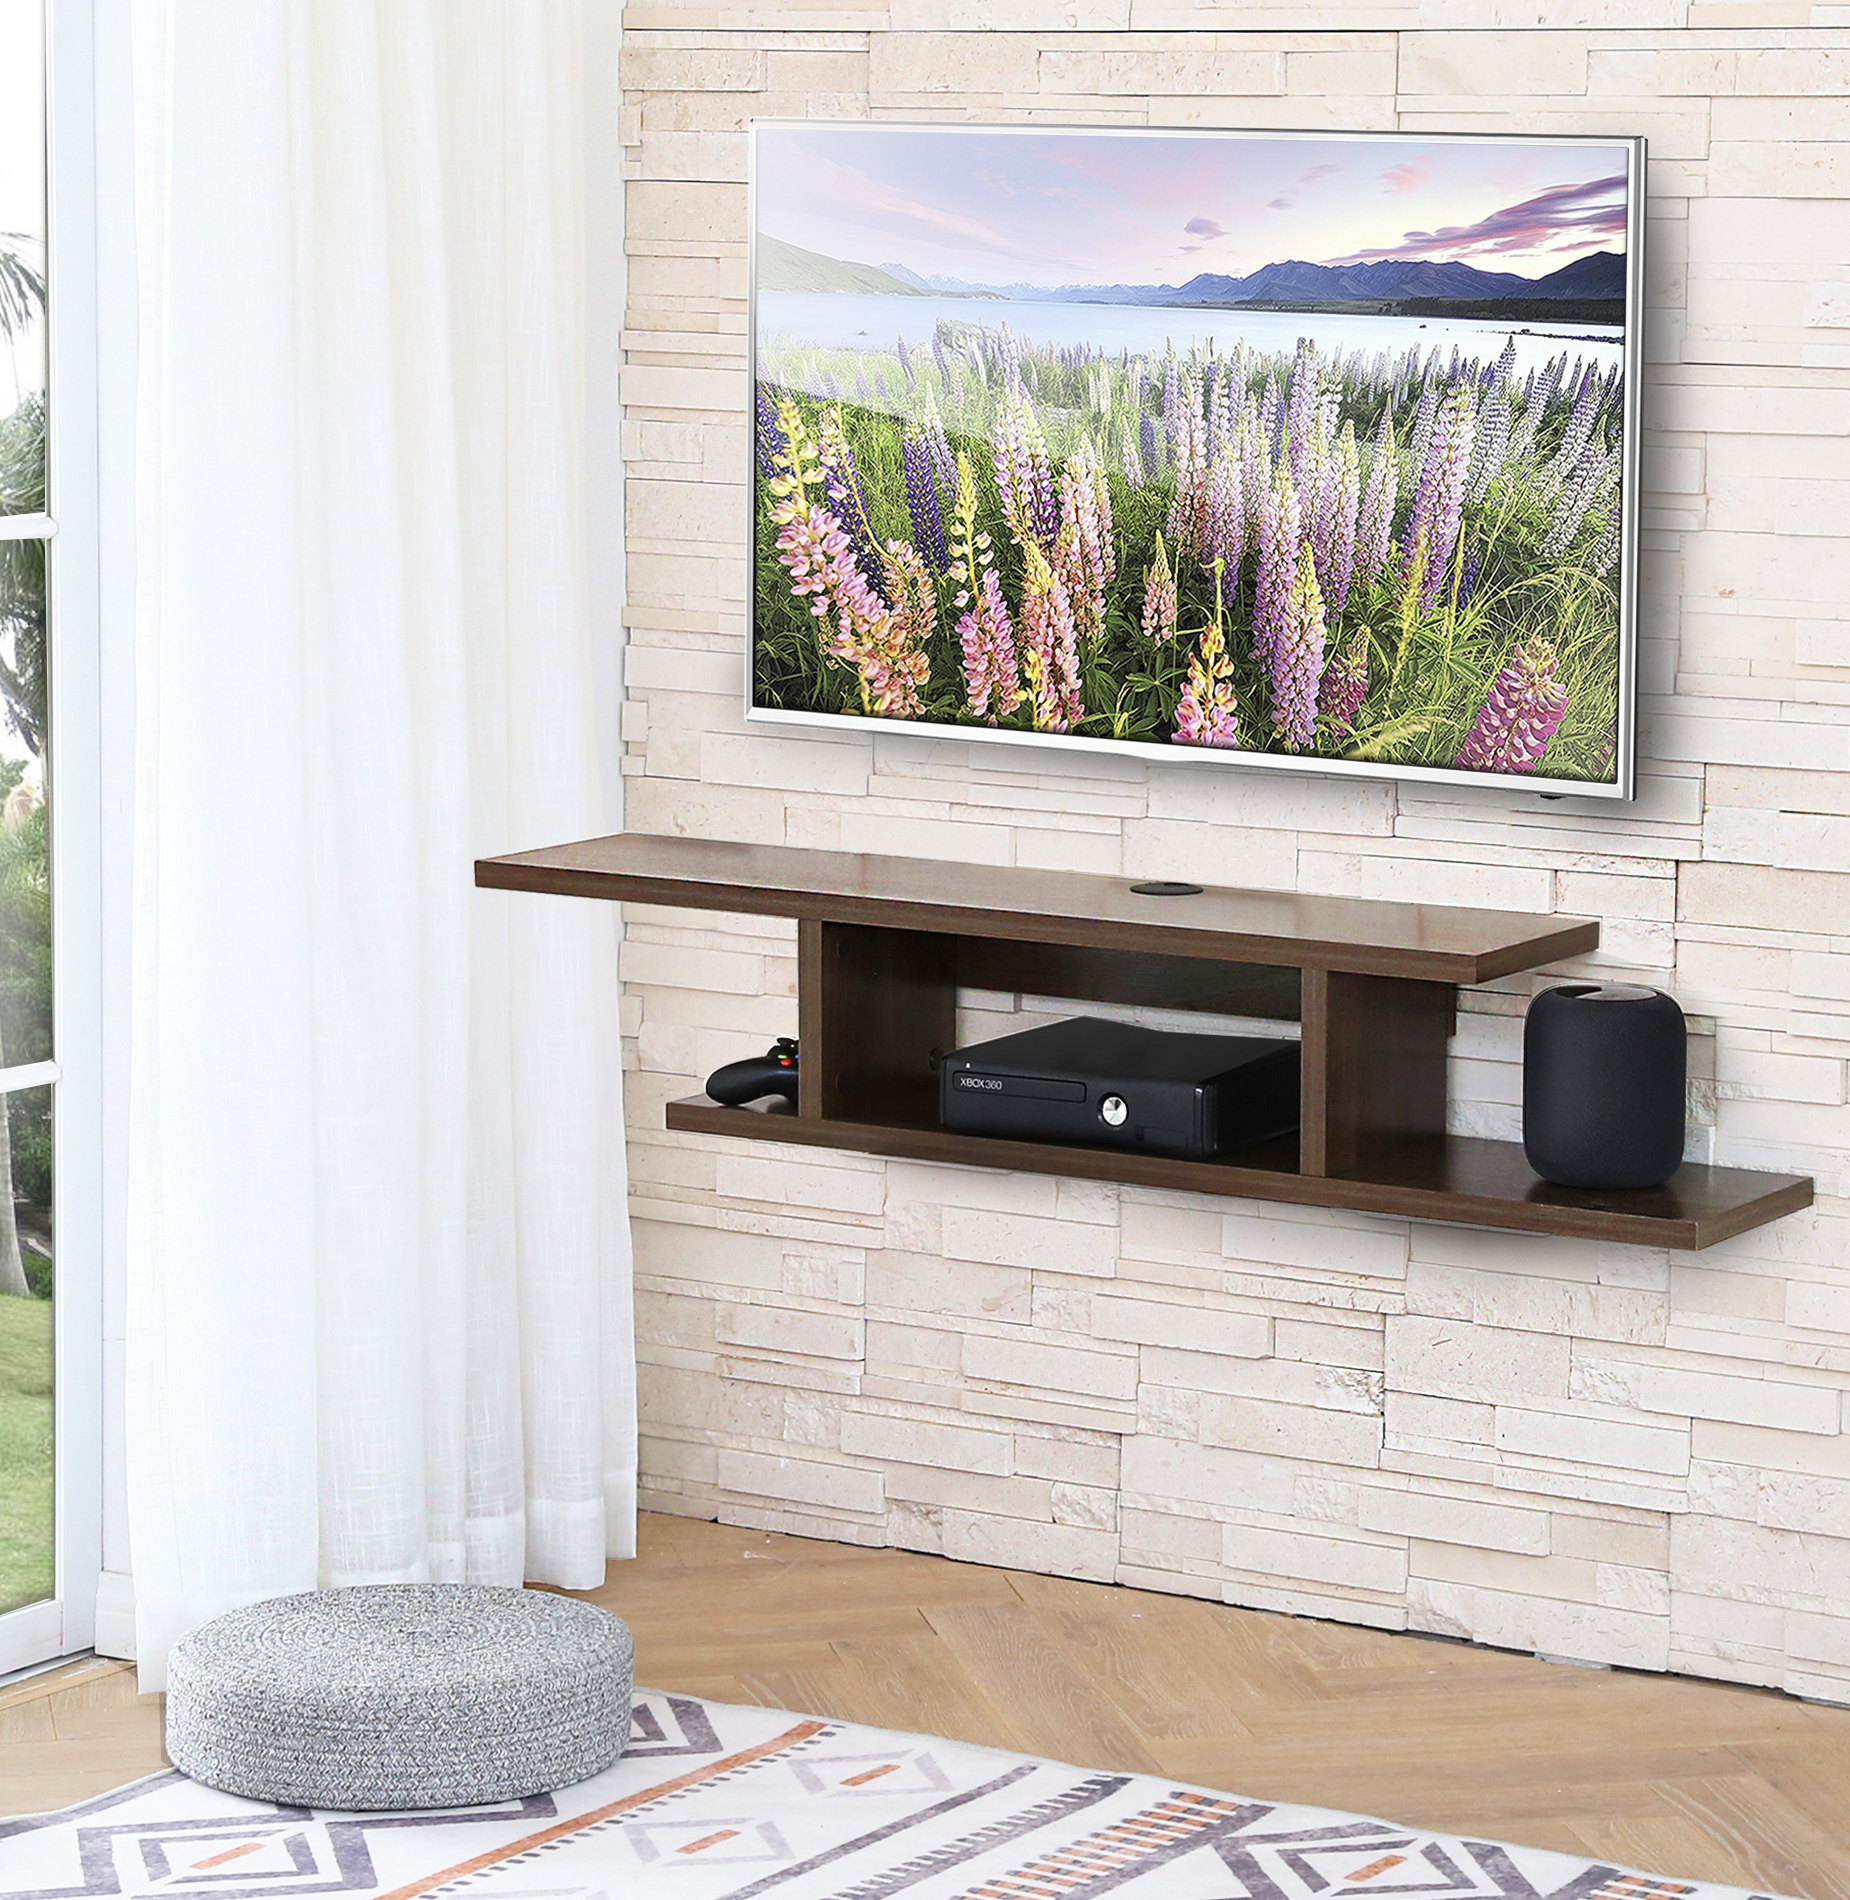 FITUEYES Floating Wall Mounted TV Console Storage Shelf Modern TV Stand Media Console Walnut DS211802WW - image 1 of 6